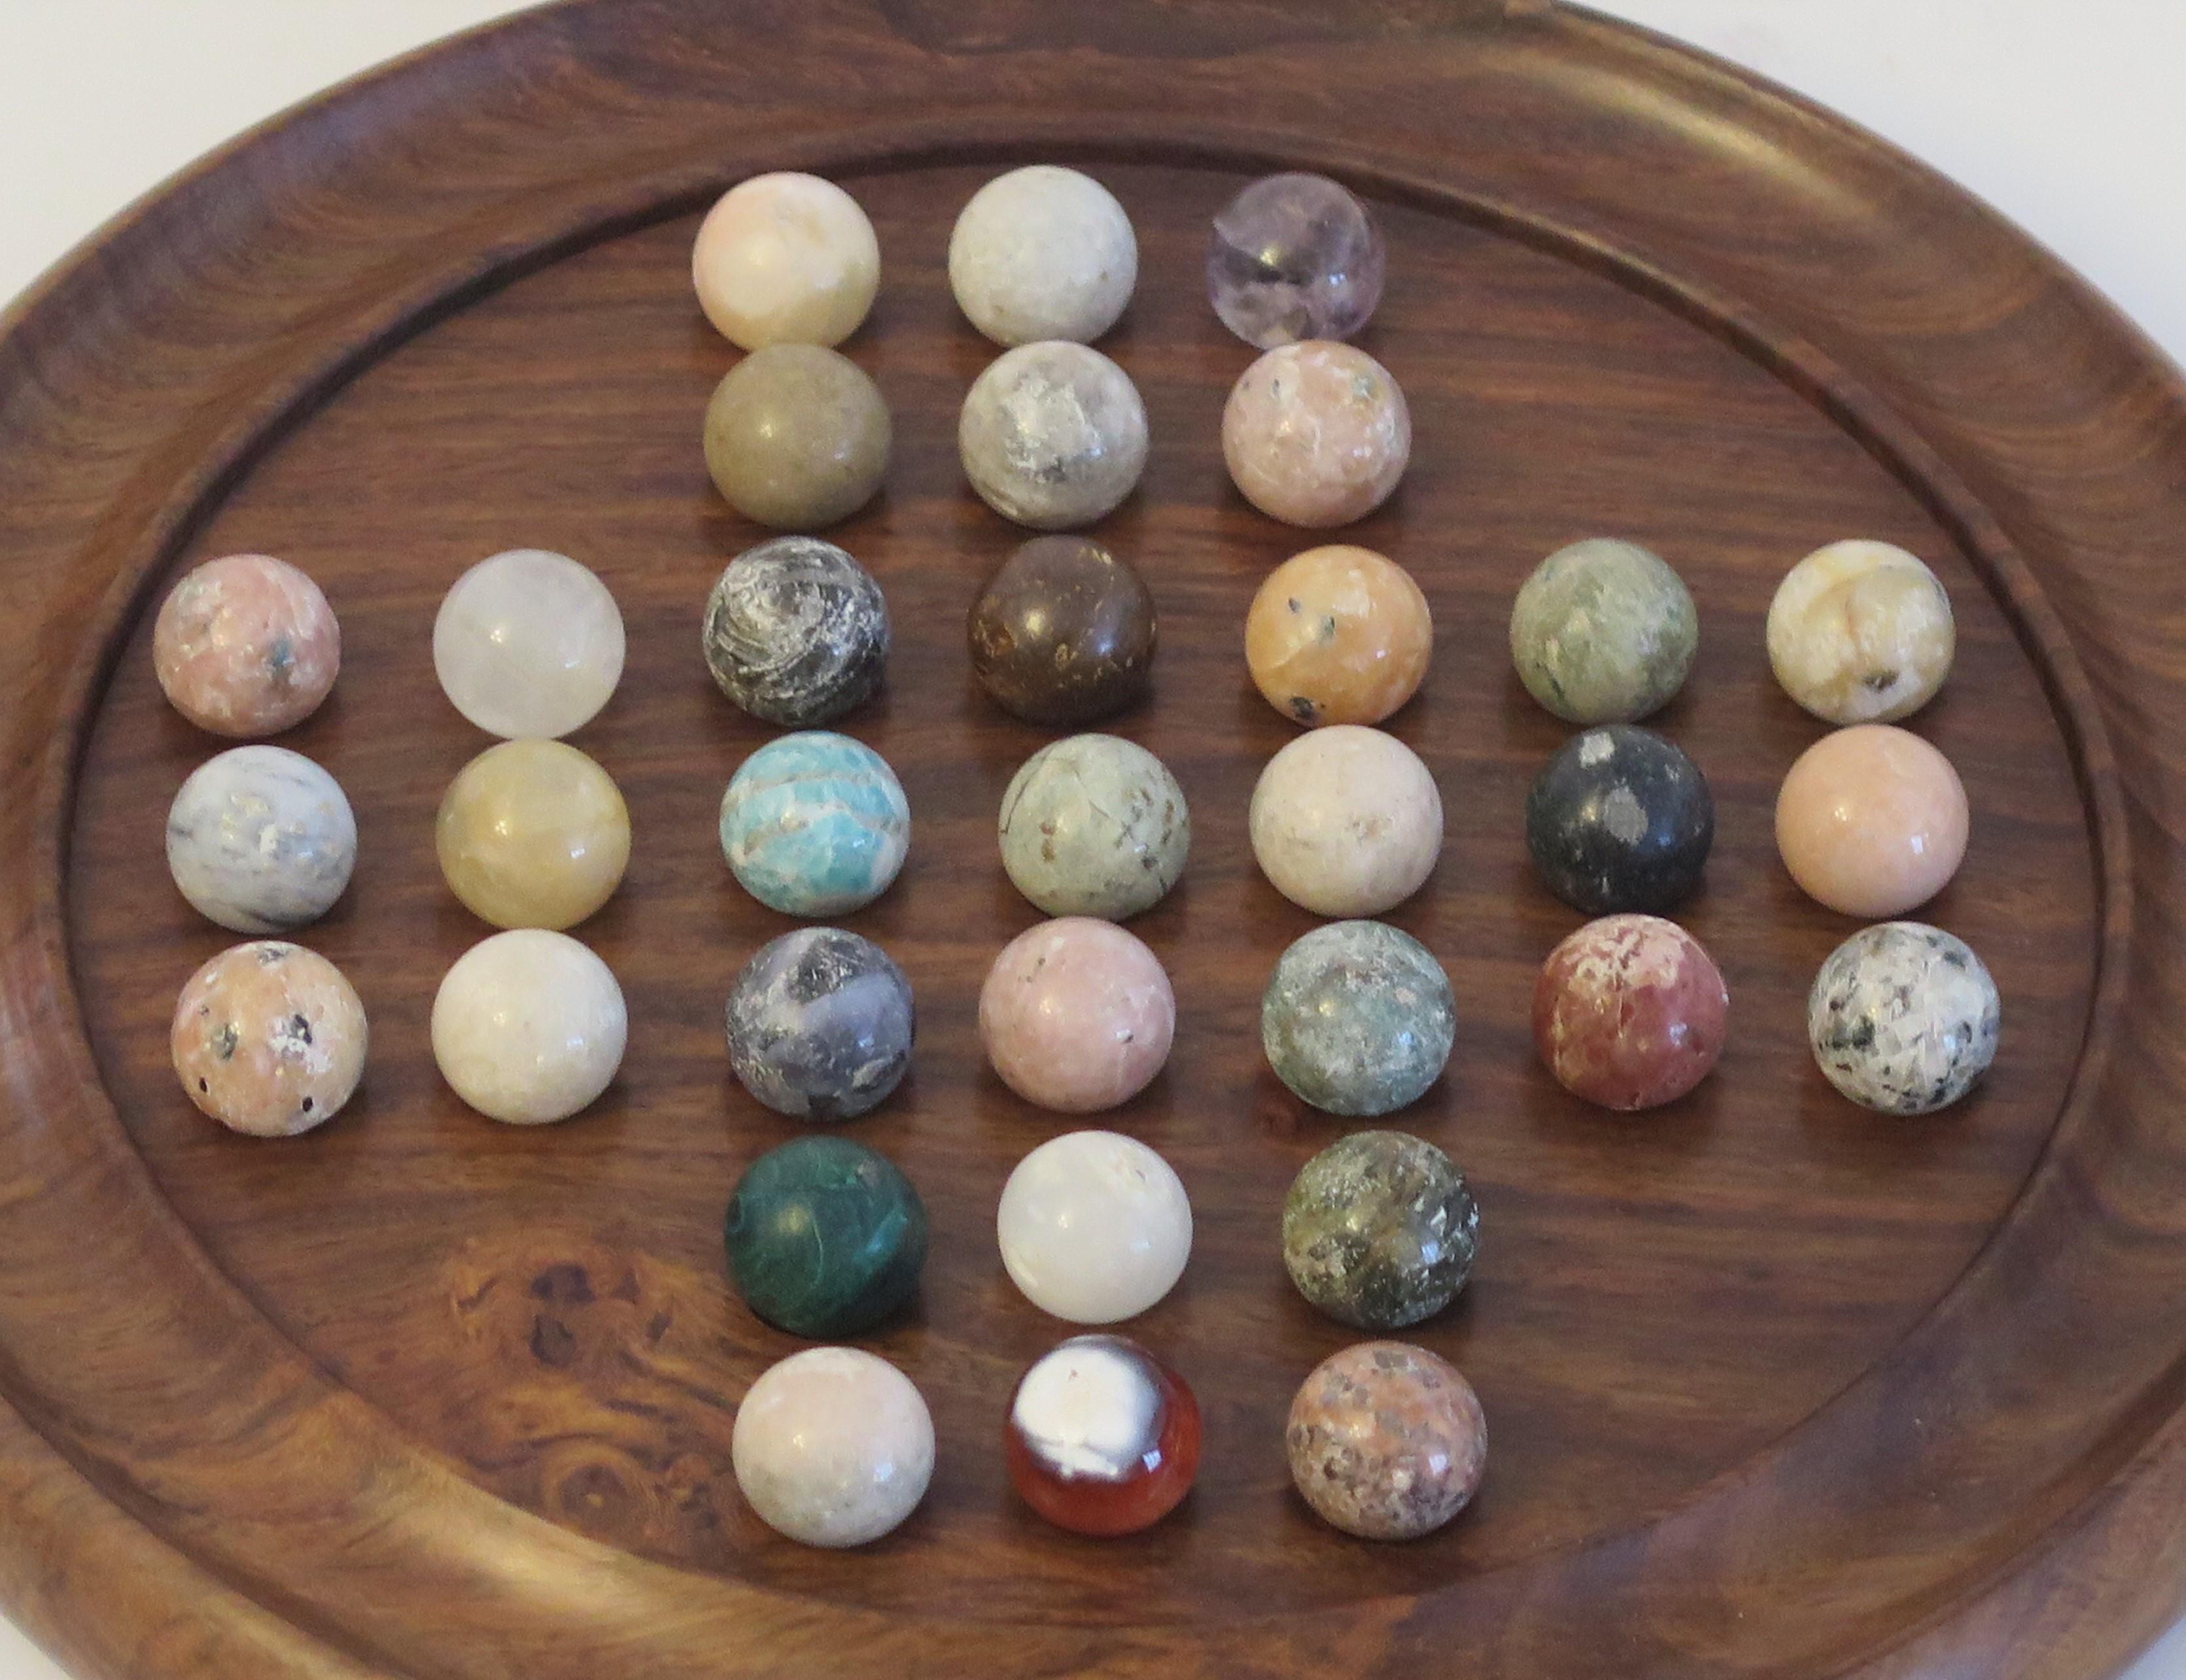 Folk Art Marble Solitaire Game Hardwood Board 33 Agate Mineral Stone Marbles, circa 1930s